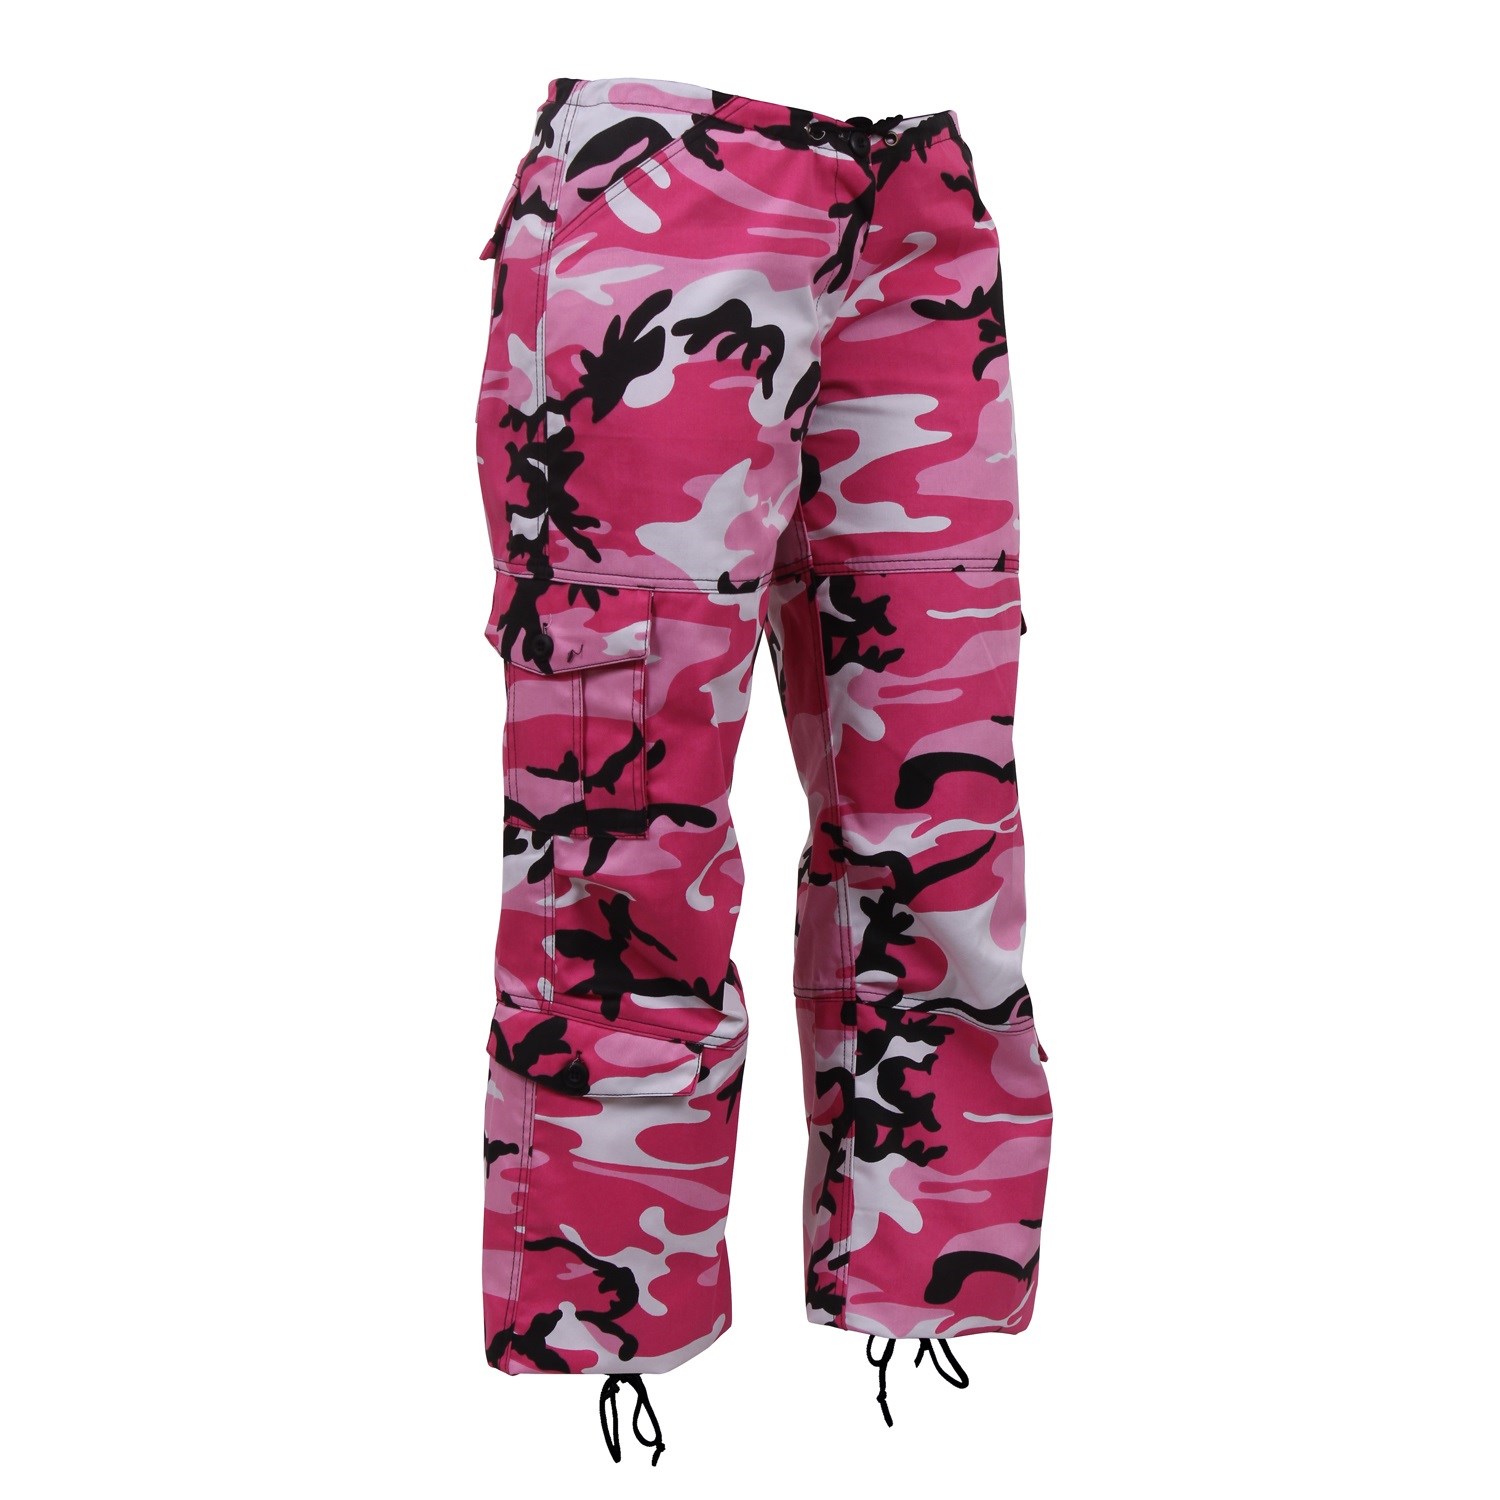 Army Print Joggers Women - Buy Army Print Joggers Women online in India